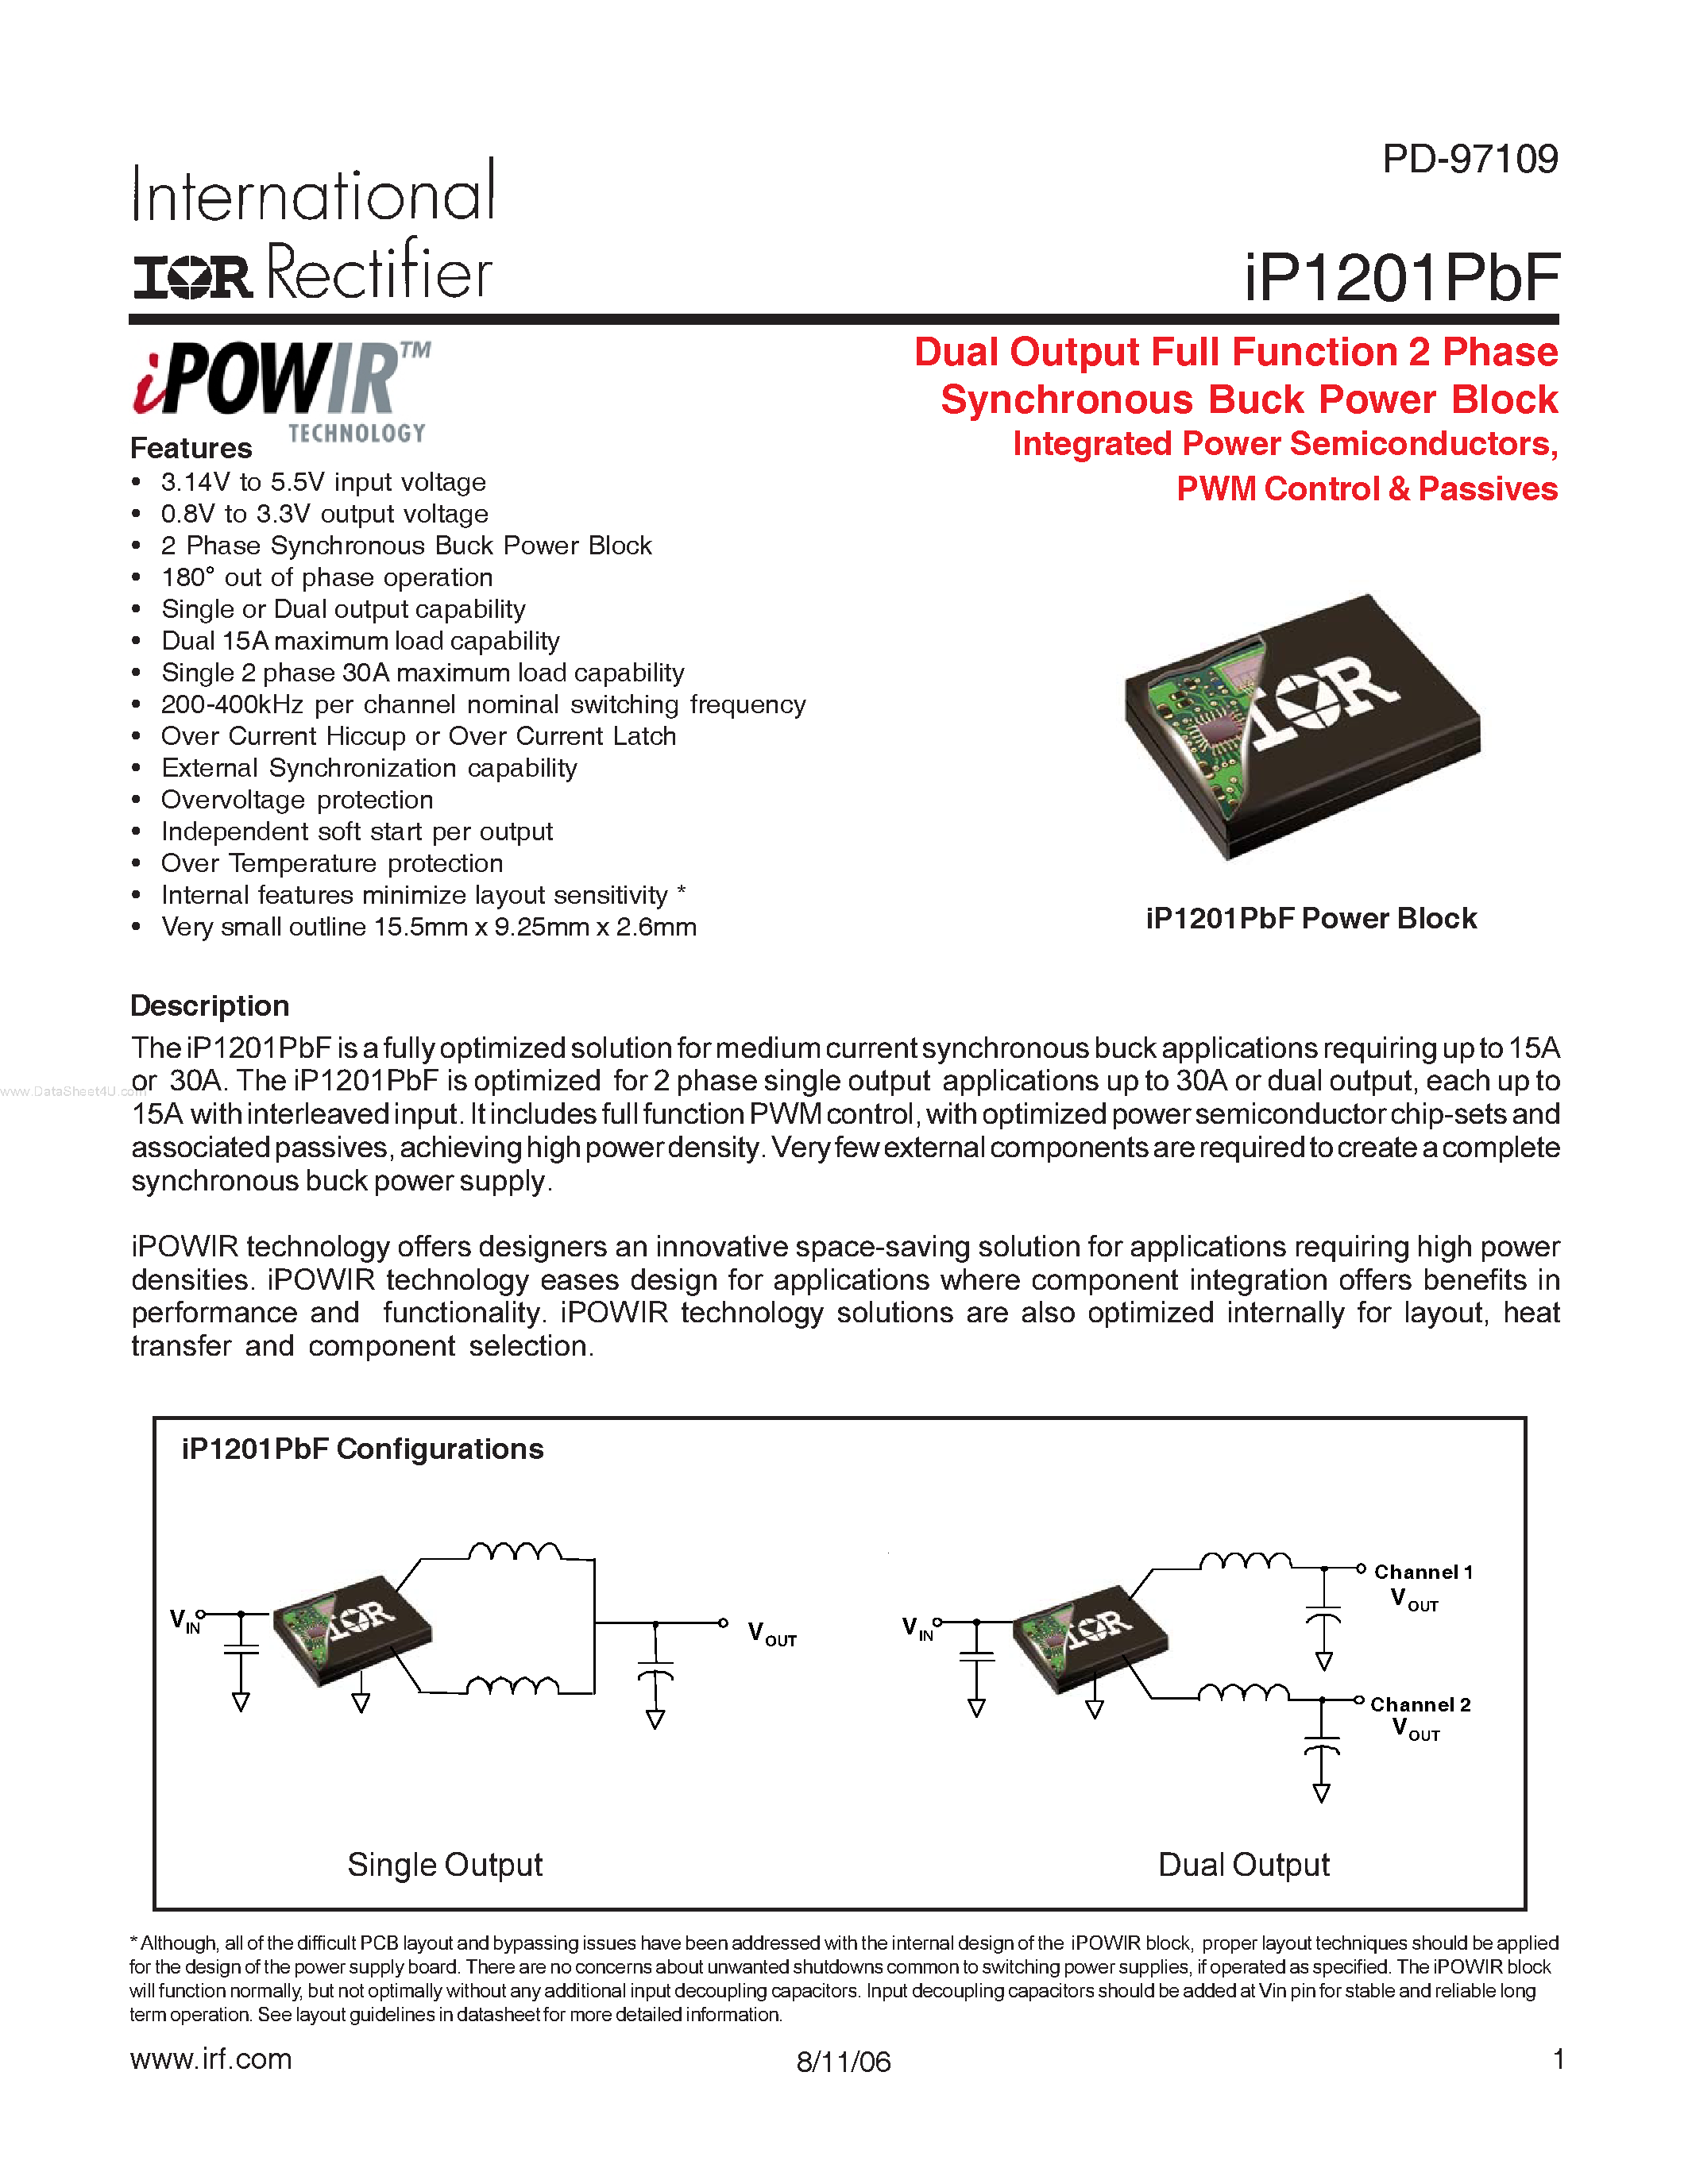 Даташит IP1201PBF - Dual Output Full Function 2 Phase Synchronous Buck Power Block Integrated Power Semiconductors страница 1